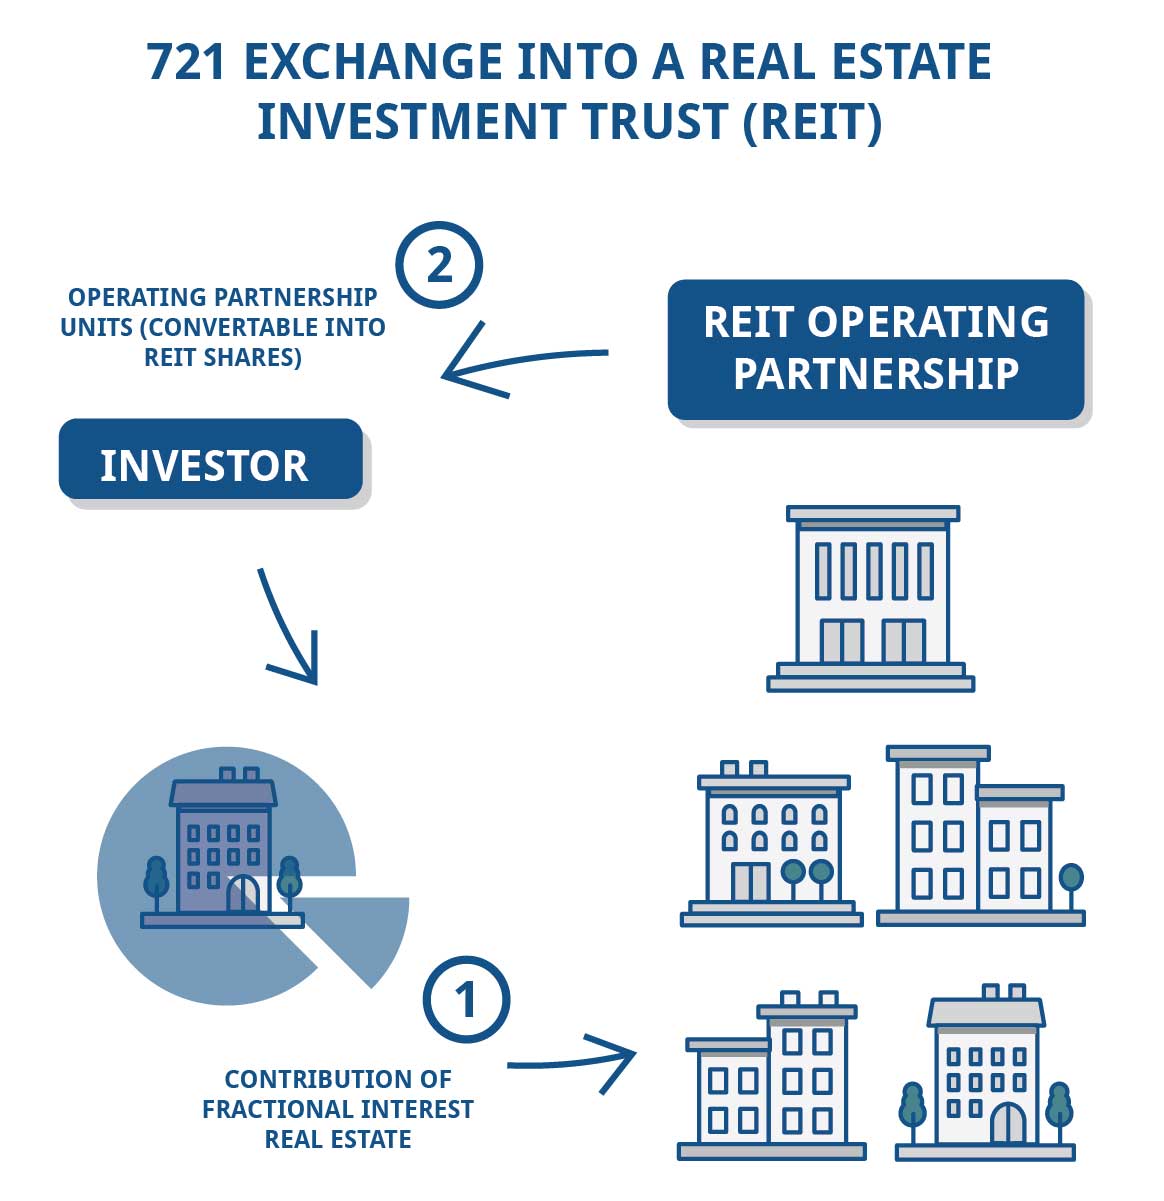 Diagram illustrating how a 721 Exchange allows investors to swtich their real estate investment into a REIT